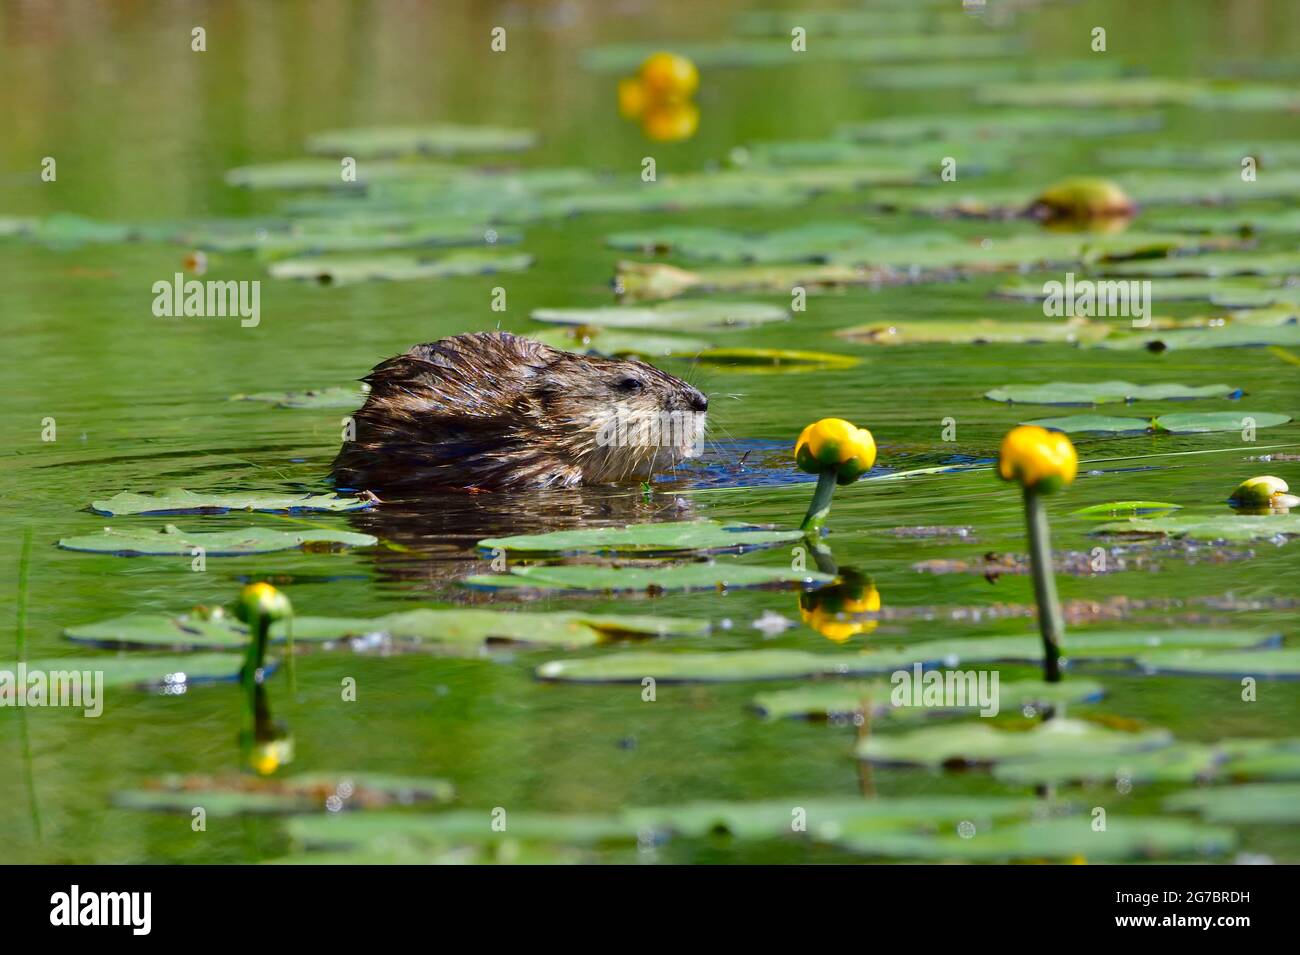 A wild muskrat Ondatra zibethicus; feeding in a lily patch in a marshy area in rural Alberta Canada. Stock Photo